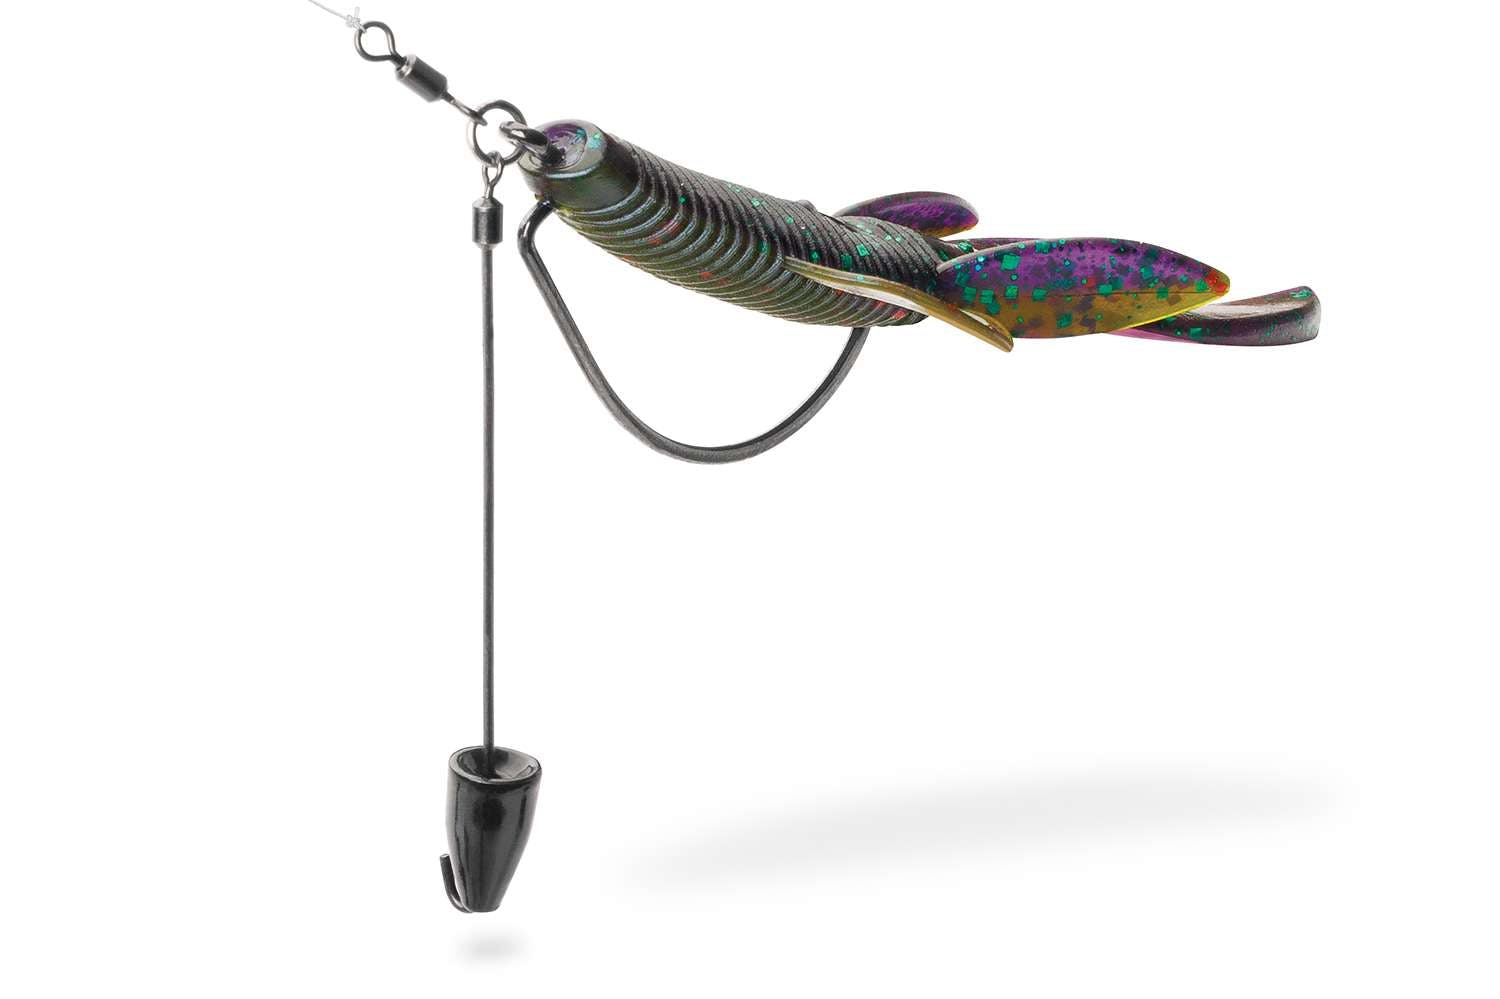 An Expert Guide to the Best Flipping Baits for Bass